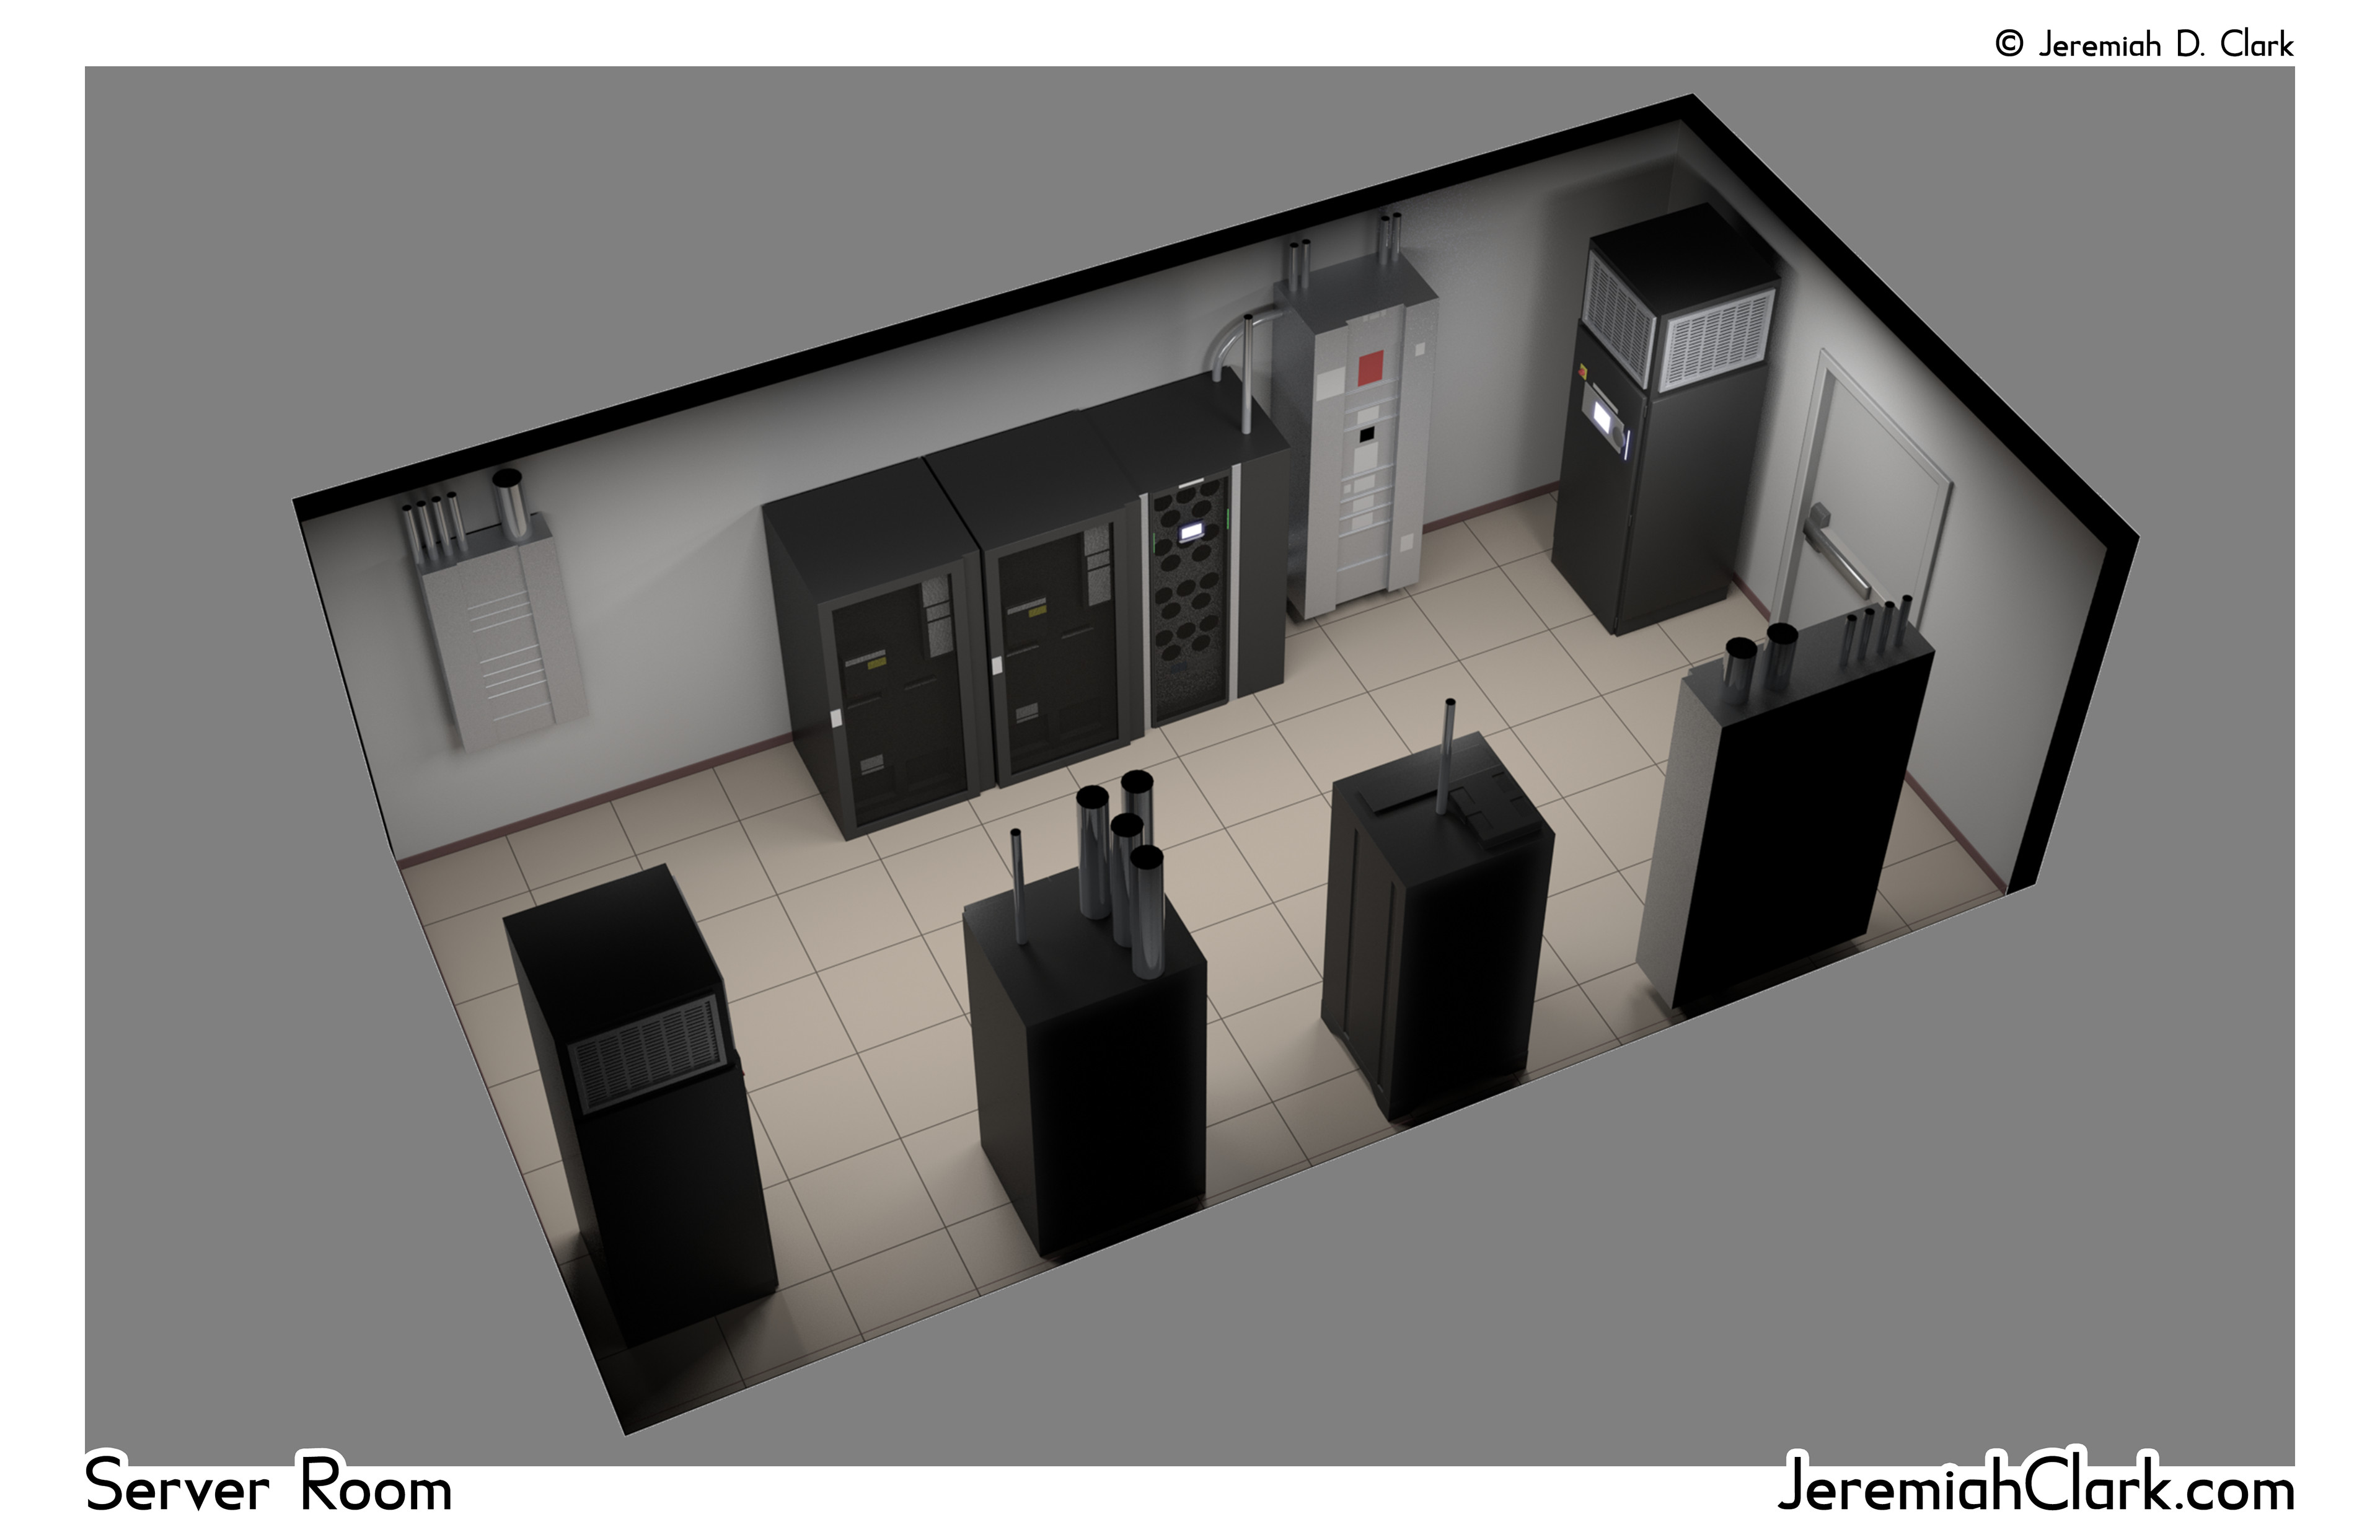 The final server room graphic.
Modeled, textured, and rendered in Modo.